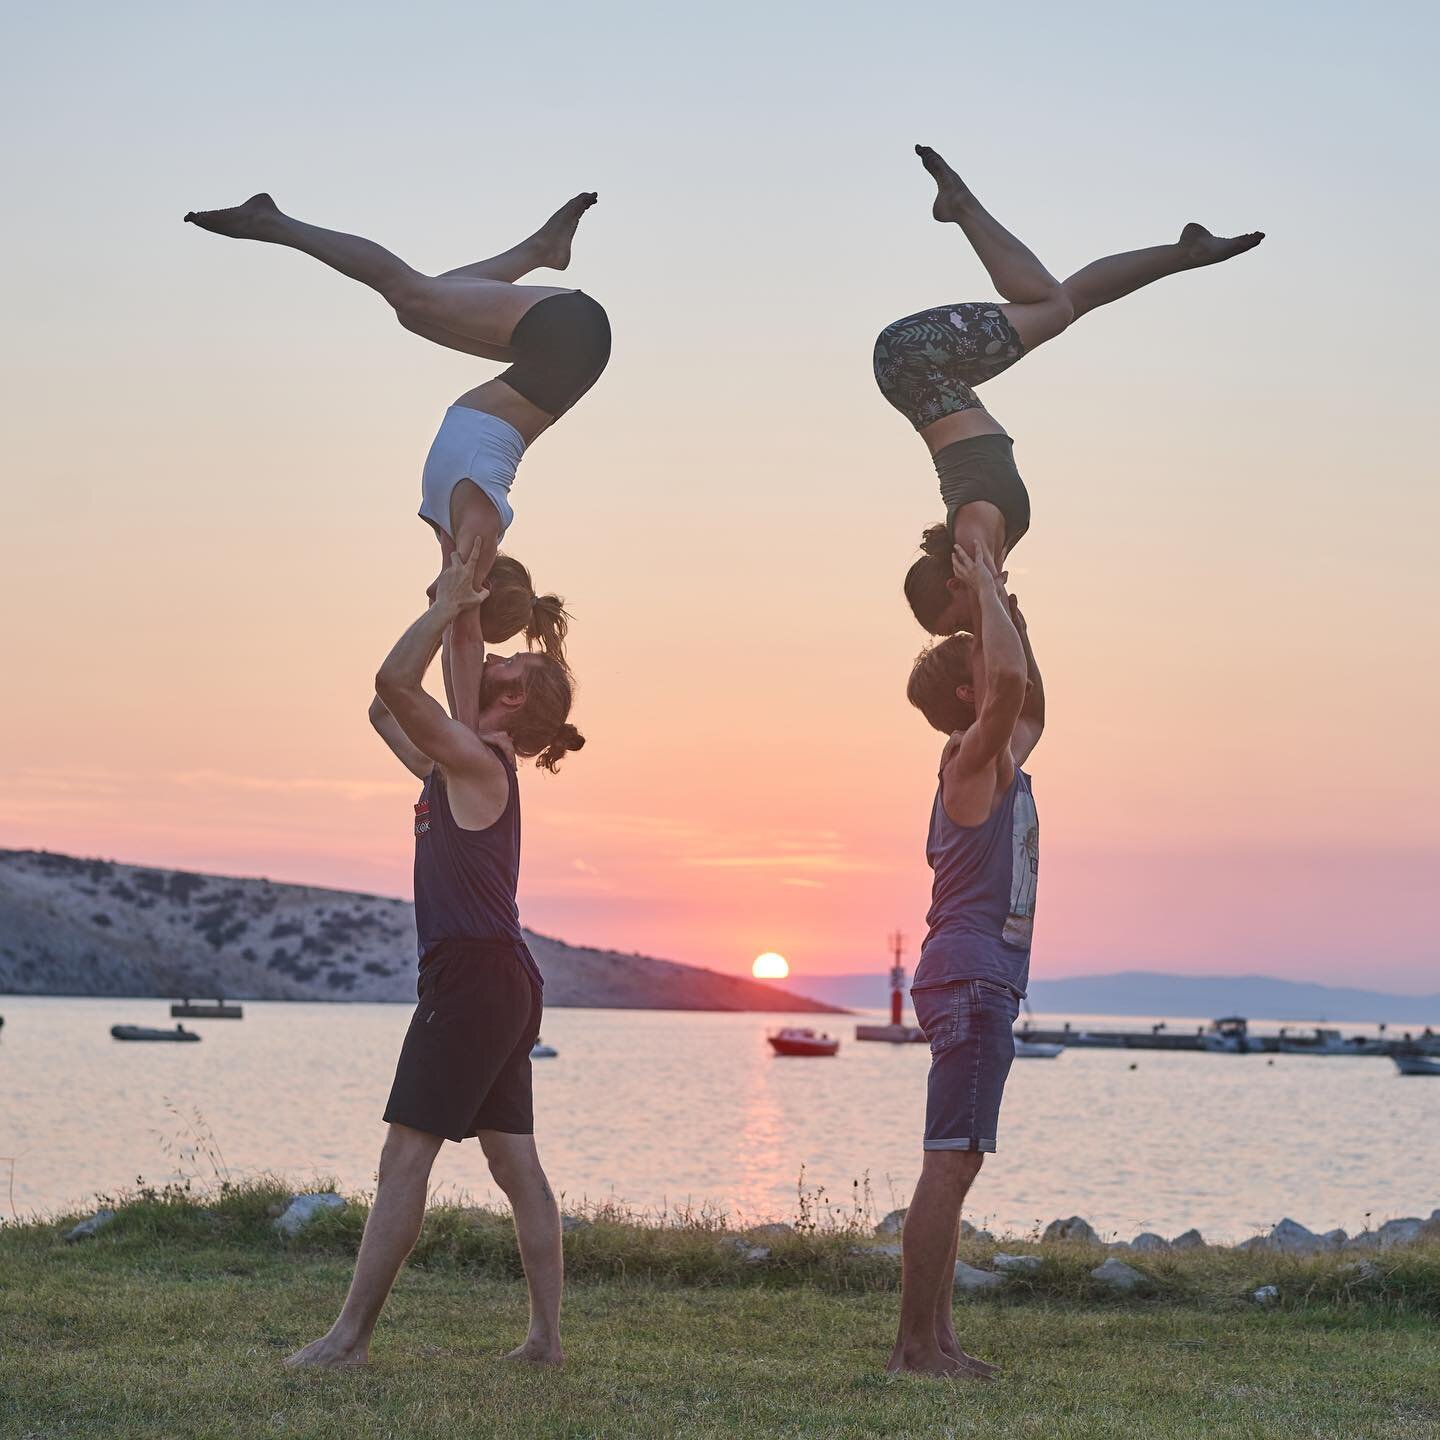 Double handstand on shoulders from Croatia with our dear friends @acro.duodavka 🥰 This was the last evening we spent there and we realised we don't have any pictures together so we needed to fix that and tried this beautiful pose 🤸&zwj;♀️

📸 photo